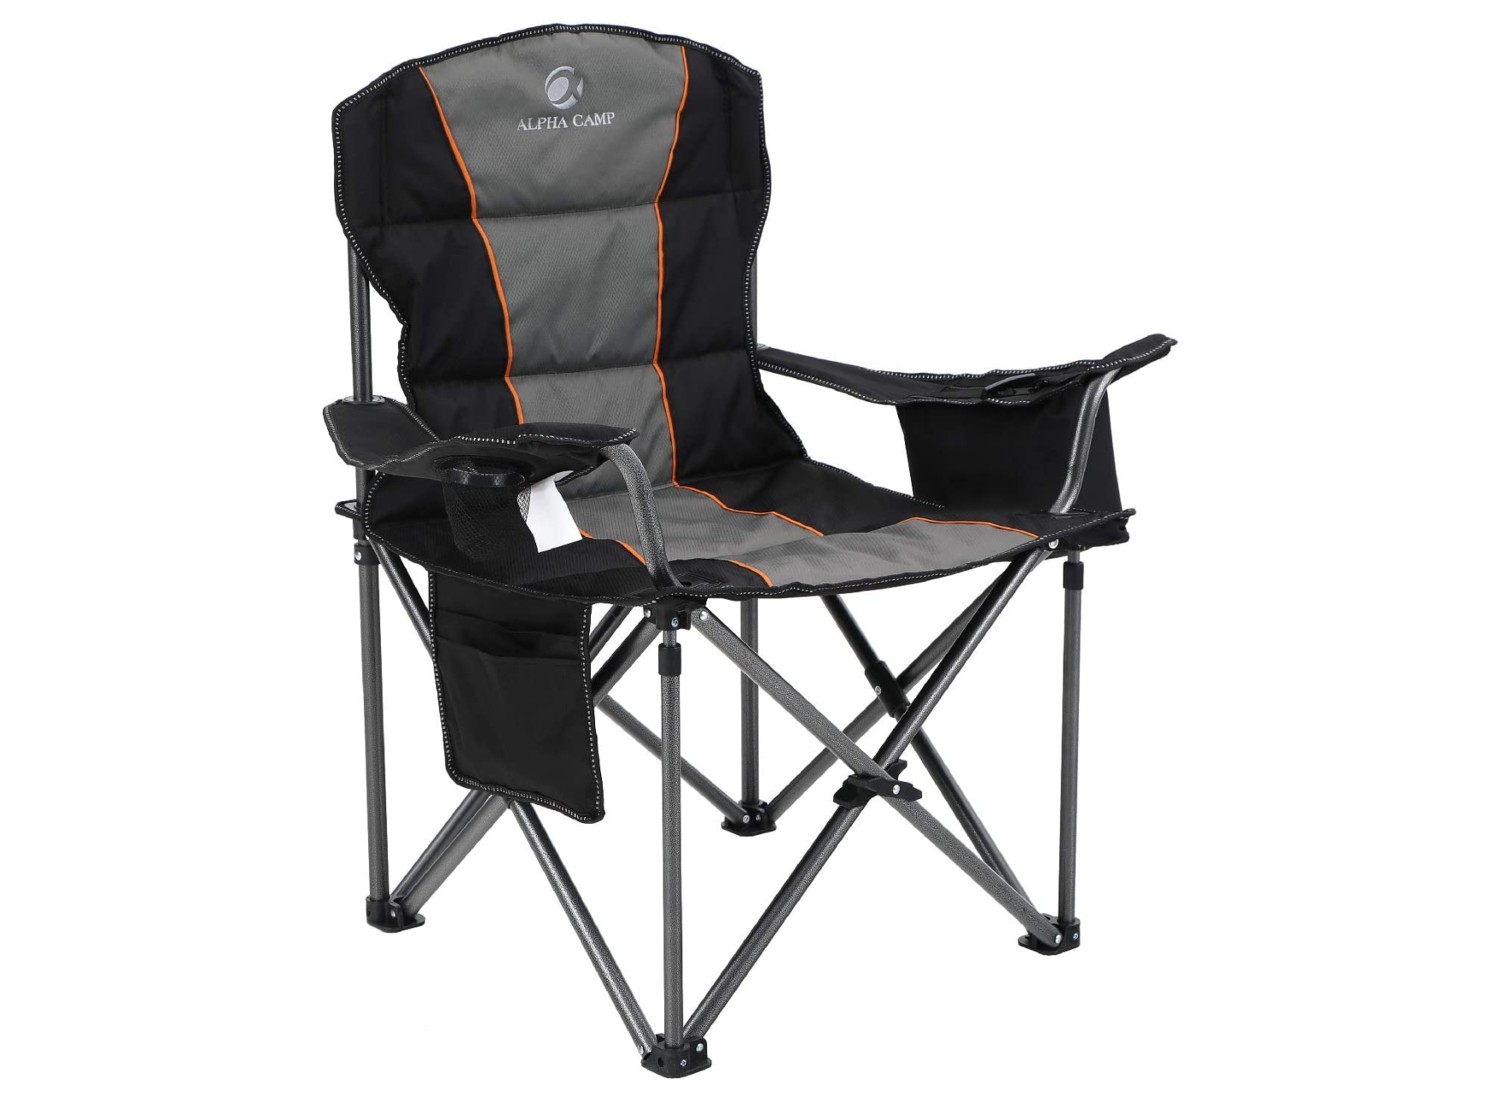 Best Outdoor Folding Chairs In 2021, What Is The Best Outdoor Folding Chair